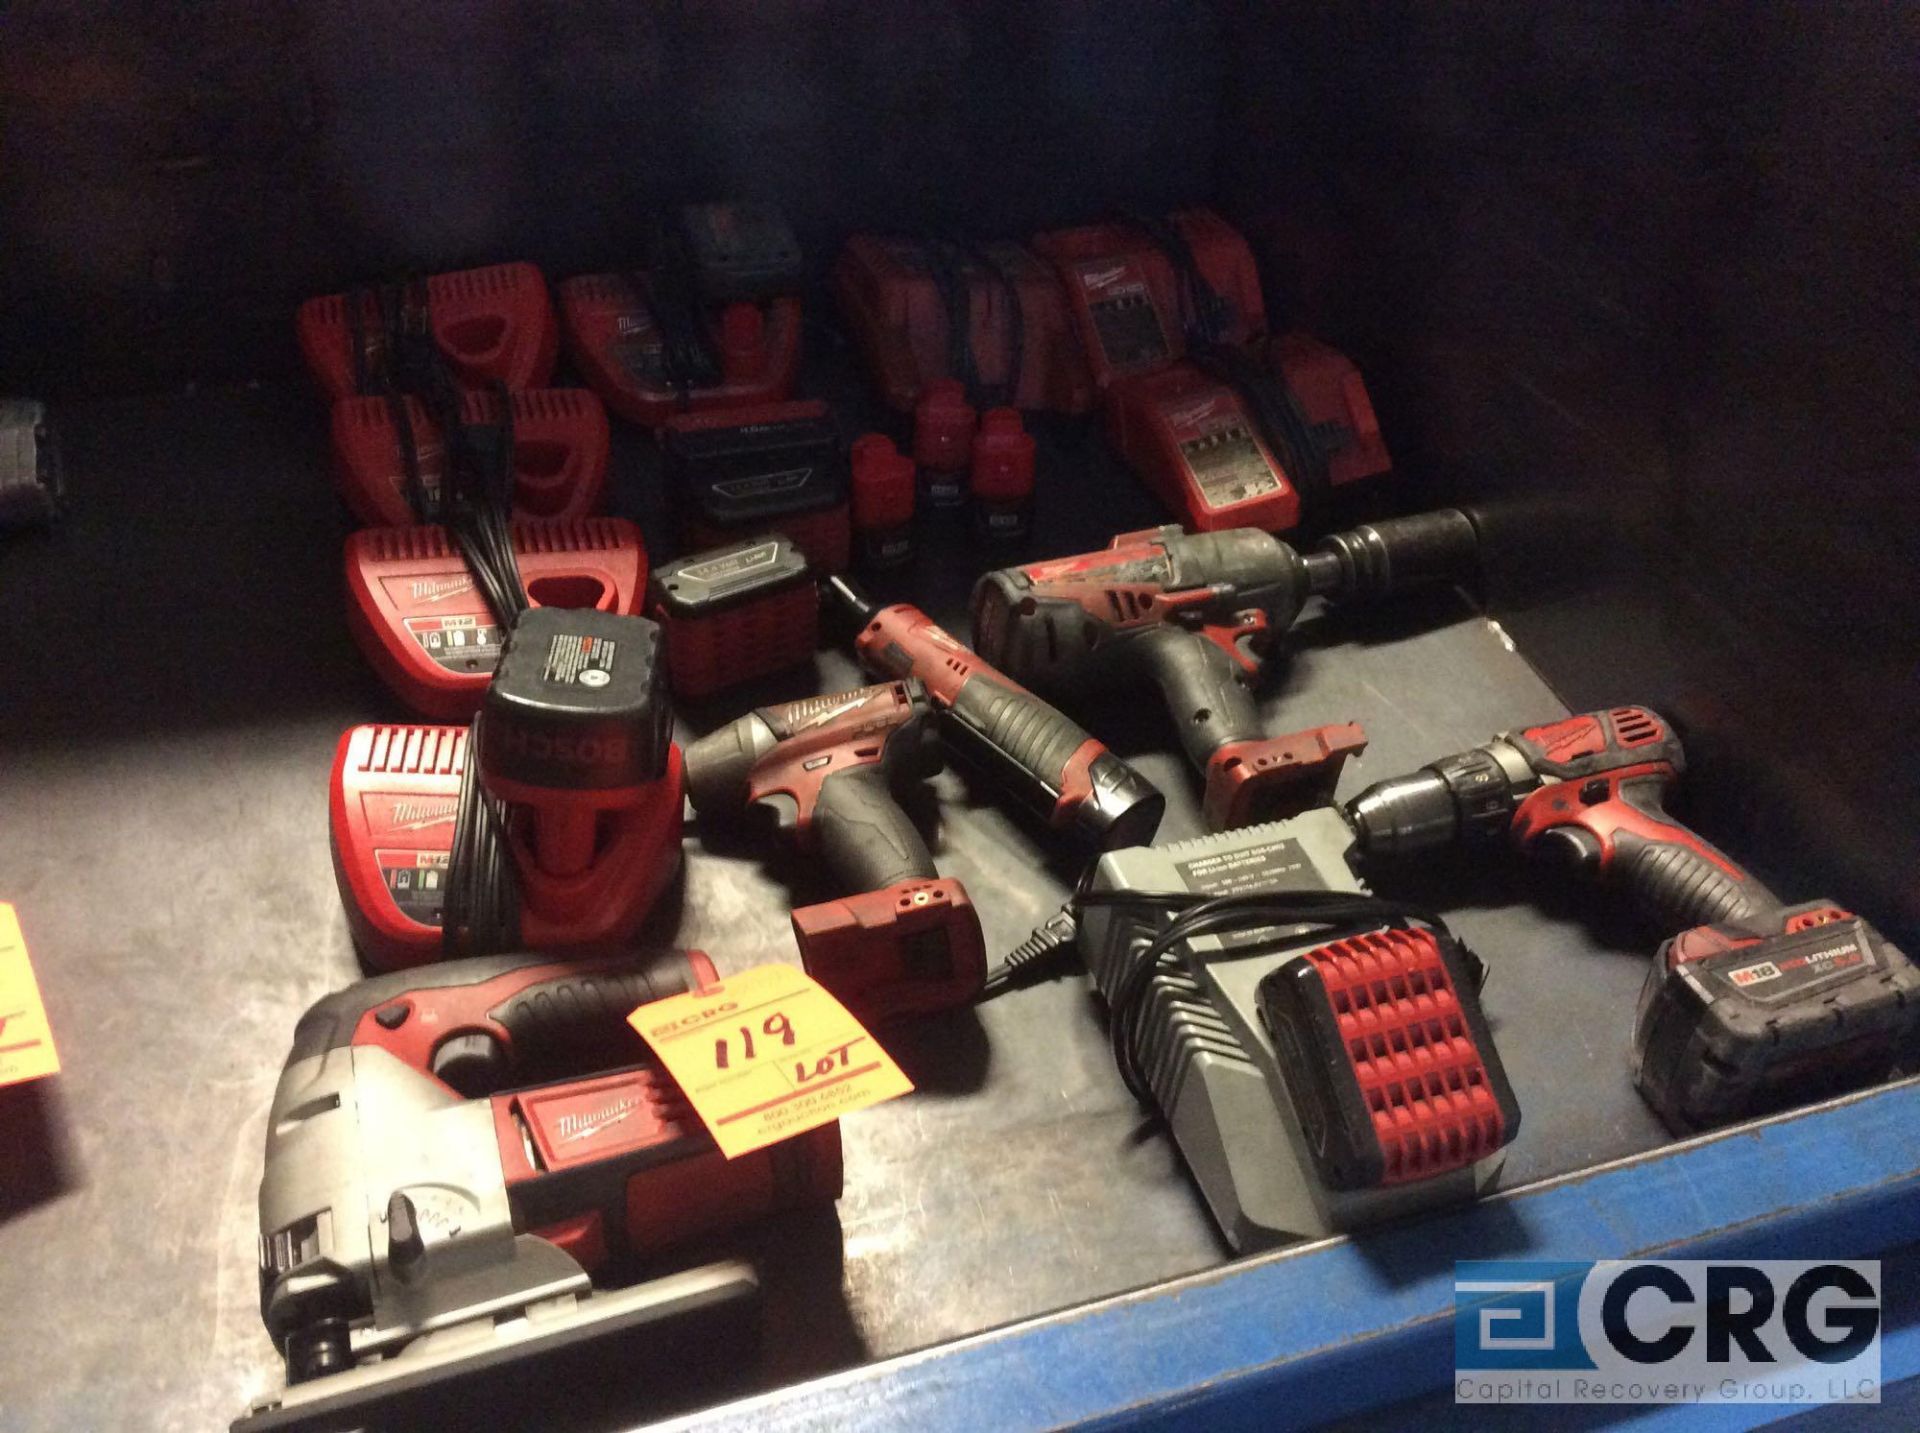 Lot of Milwaukee cordless tools including (1) jigsaw and (4) asst drills with chargers and